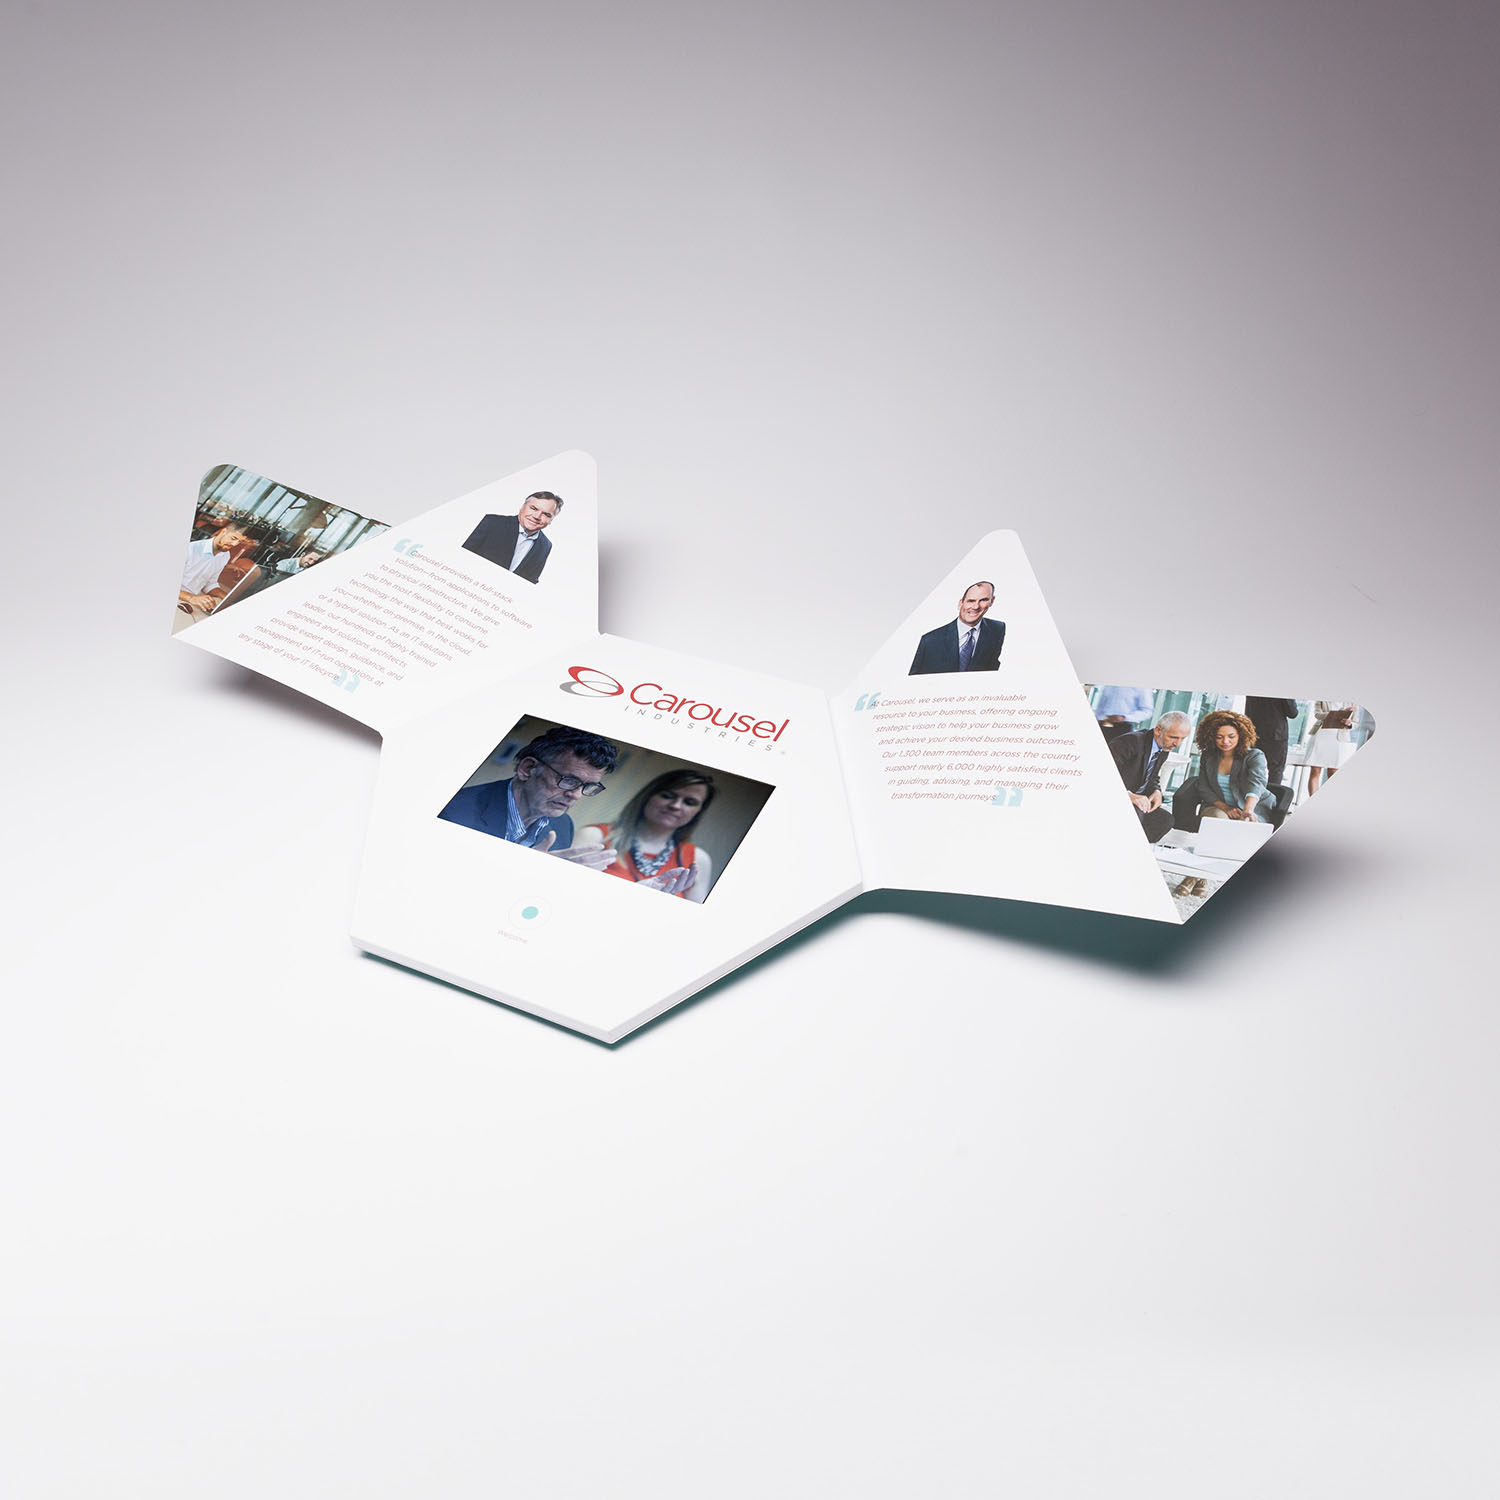 Our Hexagon Video Brochure is an example of a custom job we had the opportunity to run